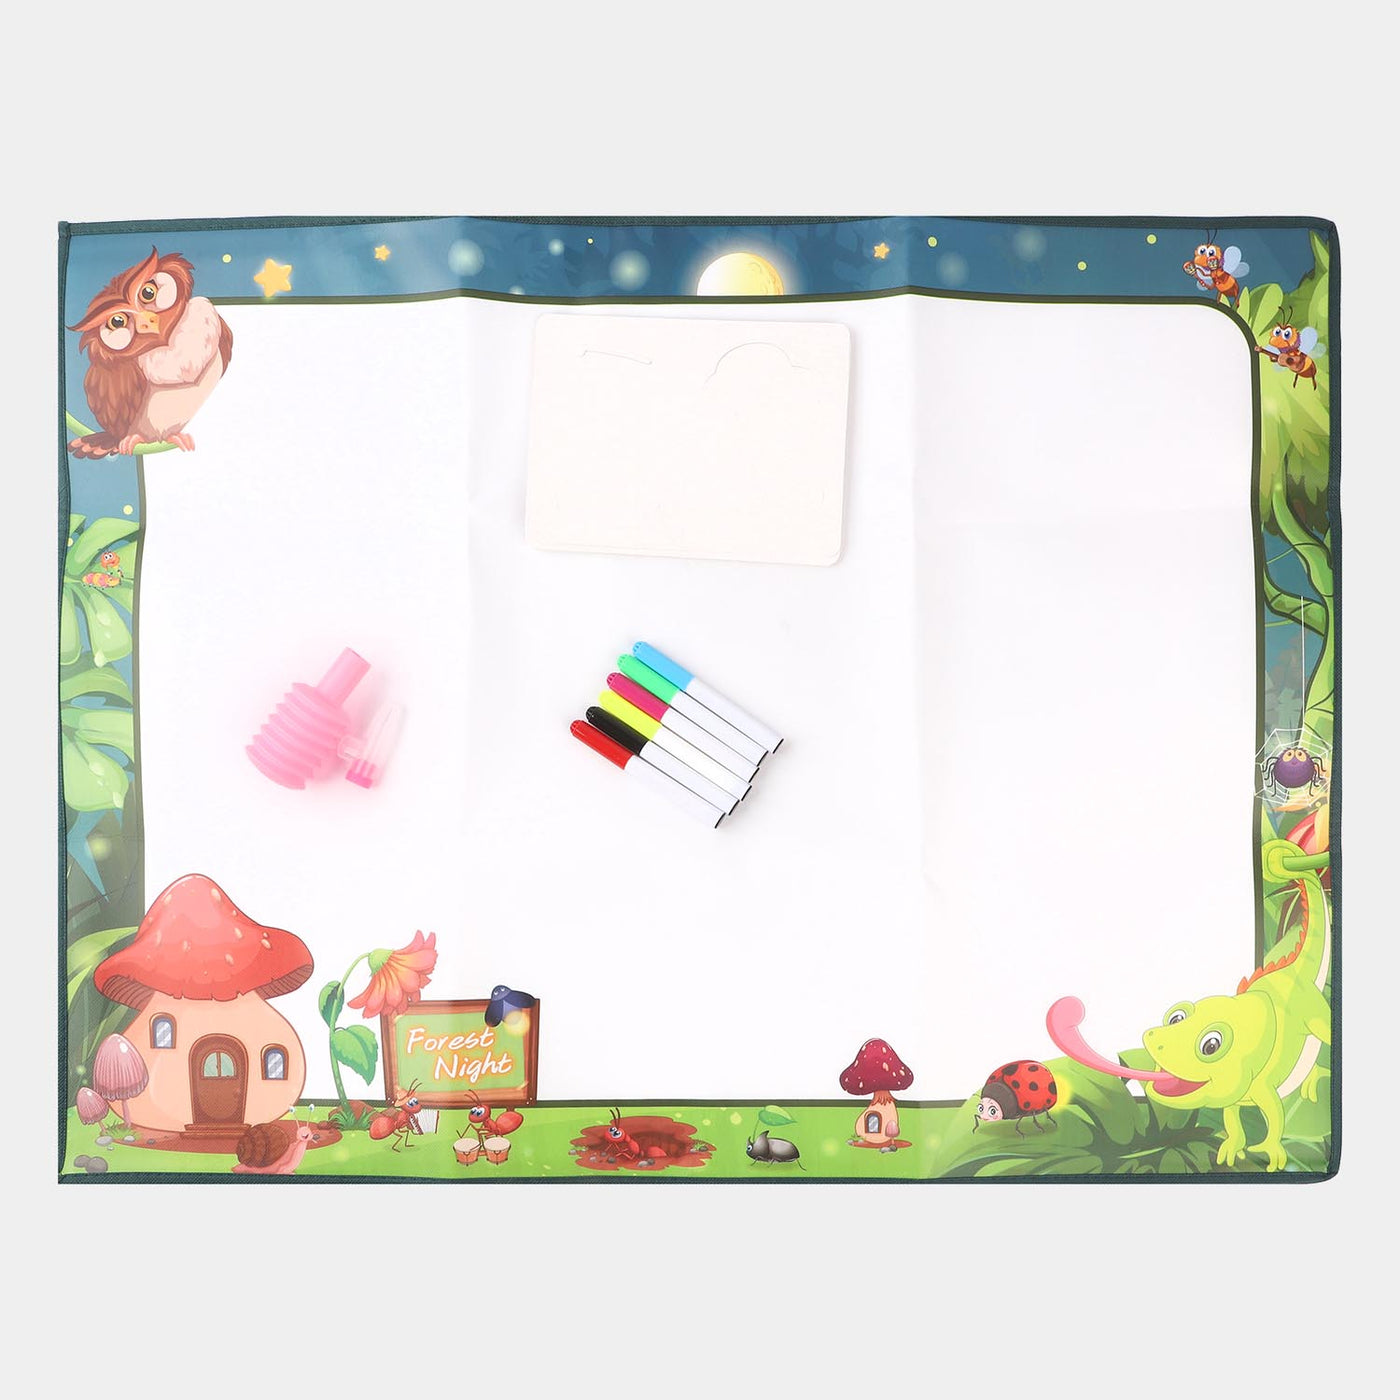 Spray Painting Play Mat For Kids